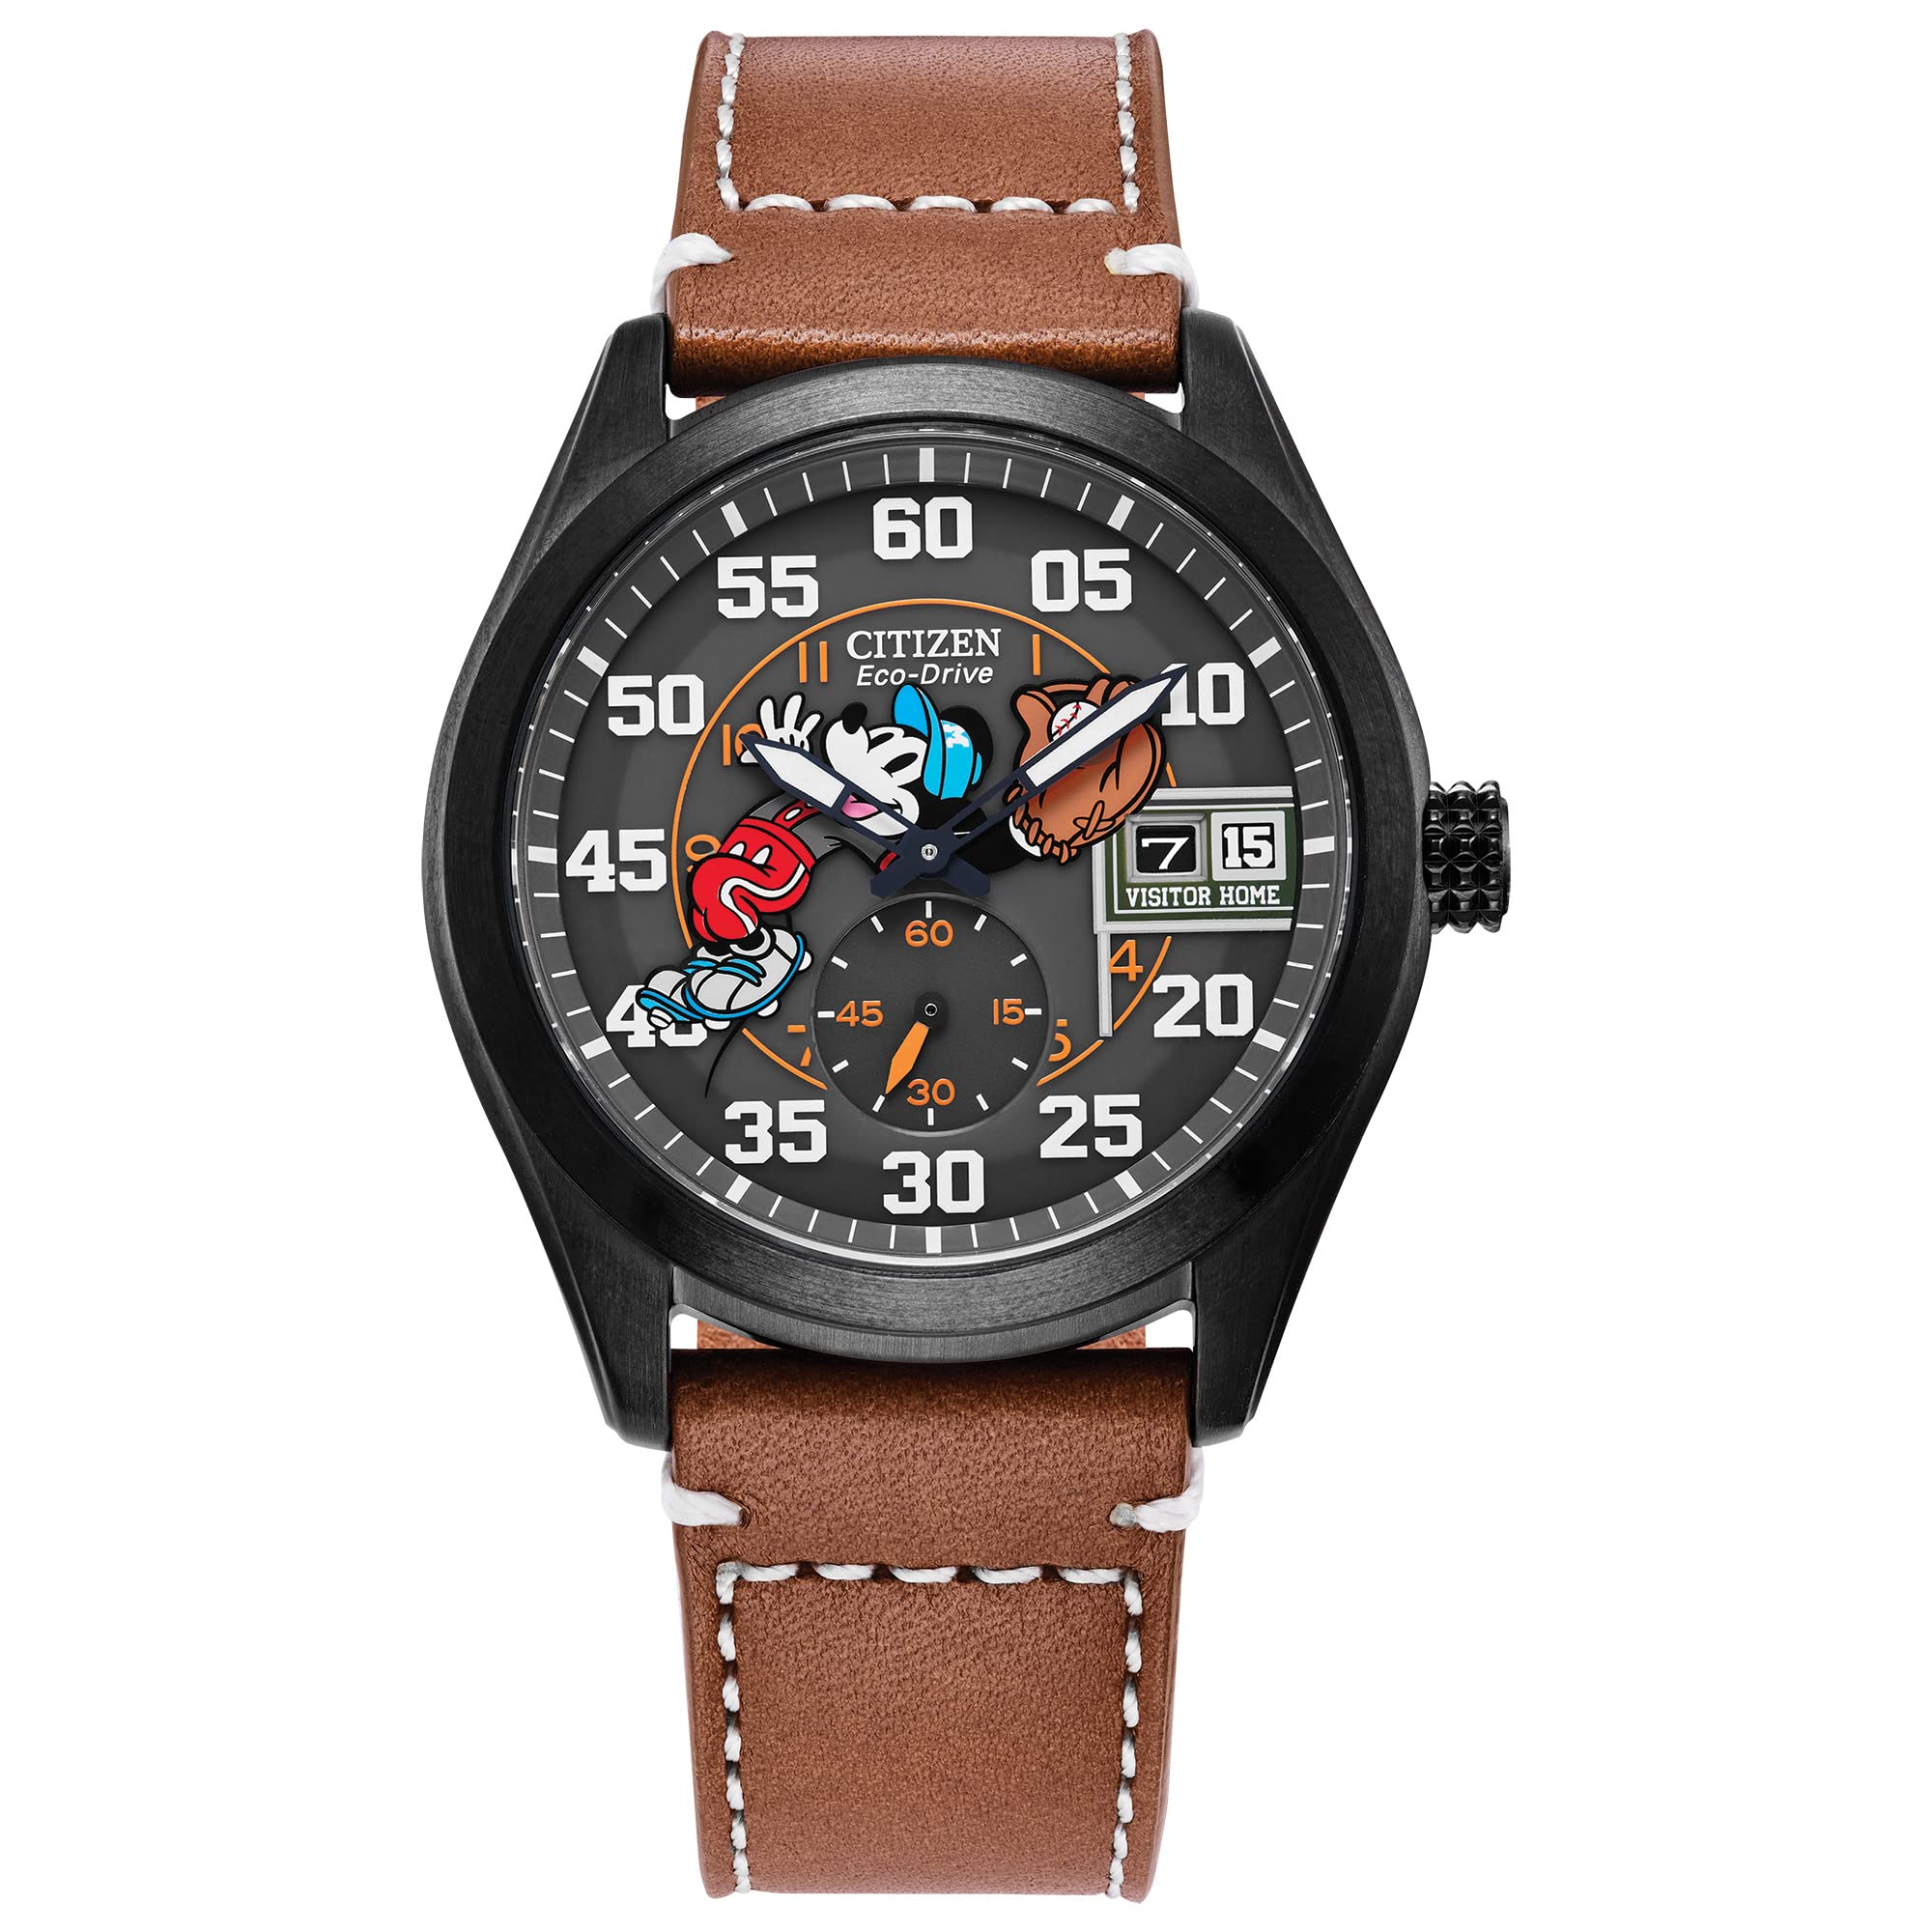 Citizen Men's Eco-Drive Disney Mickey Mouse Baseball Watch, Black IP Stainless Steel with Brown Leather Strap.43mm (Model: BV1089-05W)